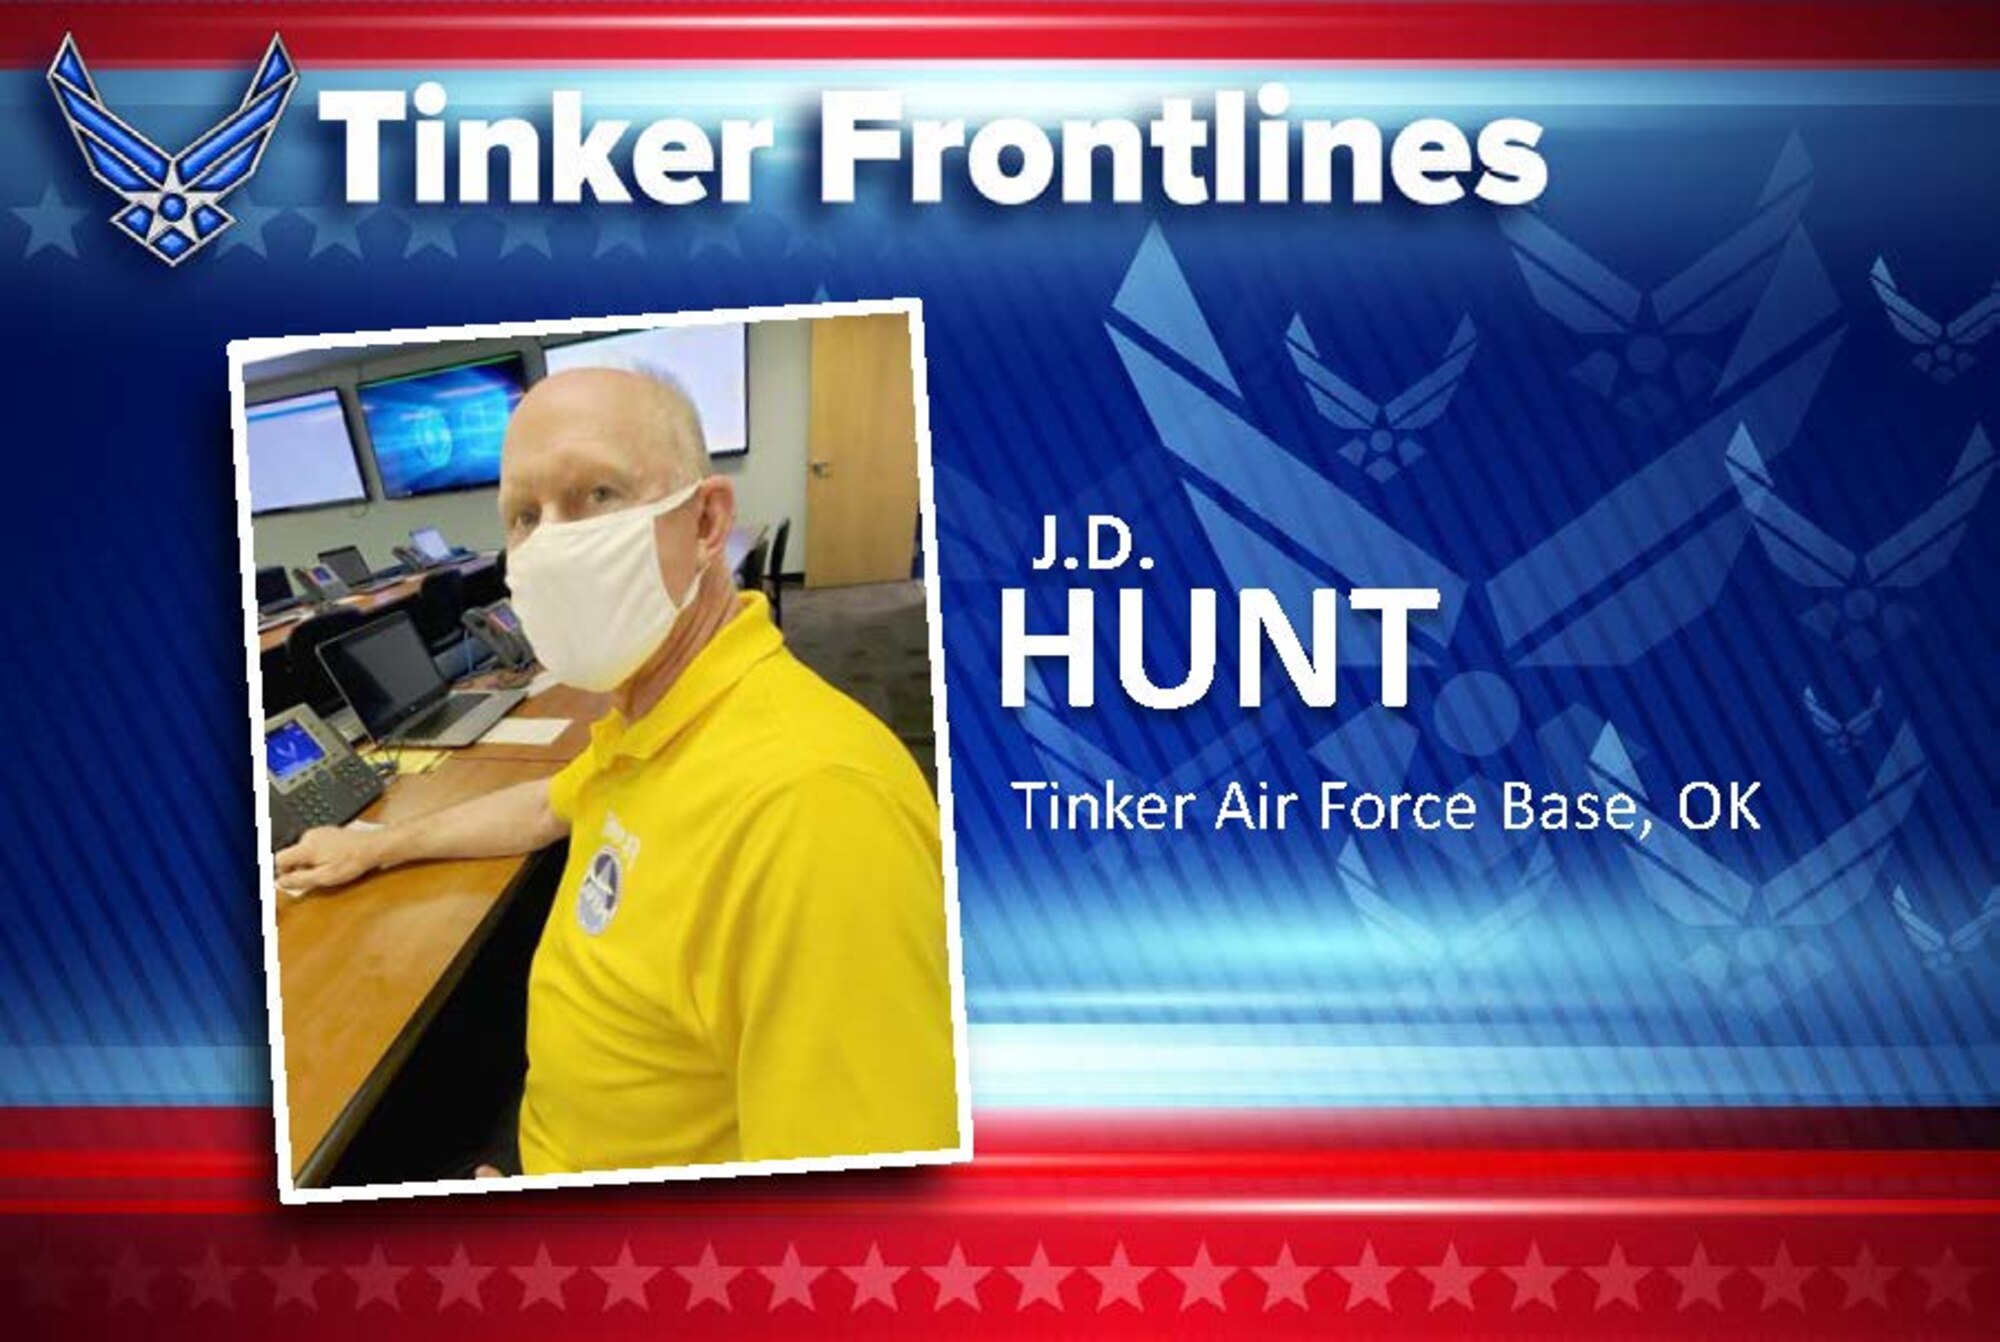 J.D. Hunt is an emergency management specialist in Tinker’s Emergency Operations Center.